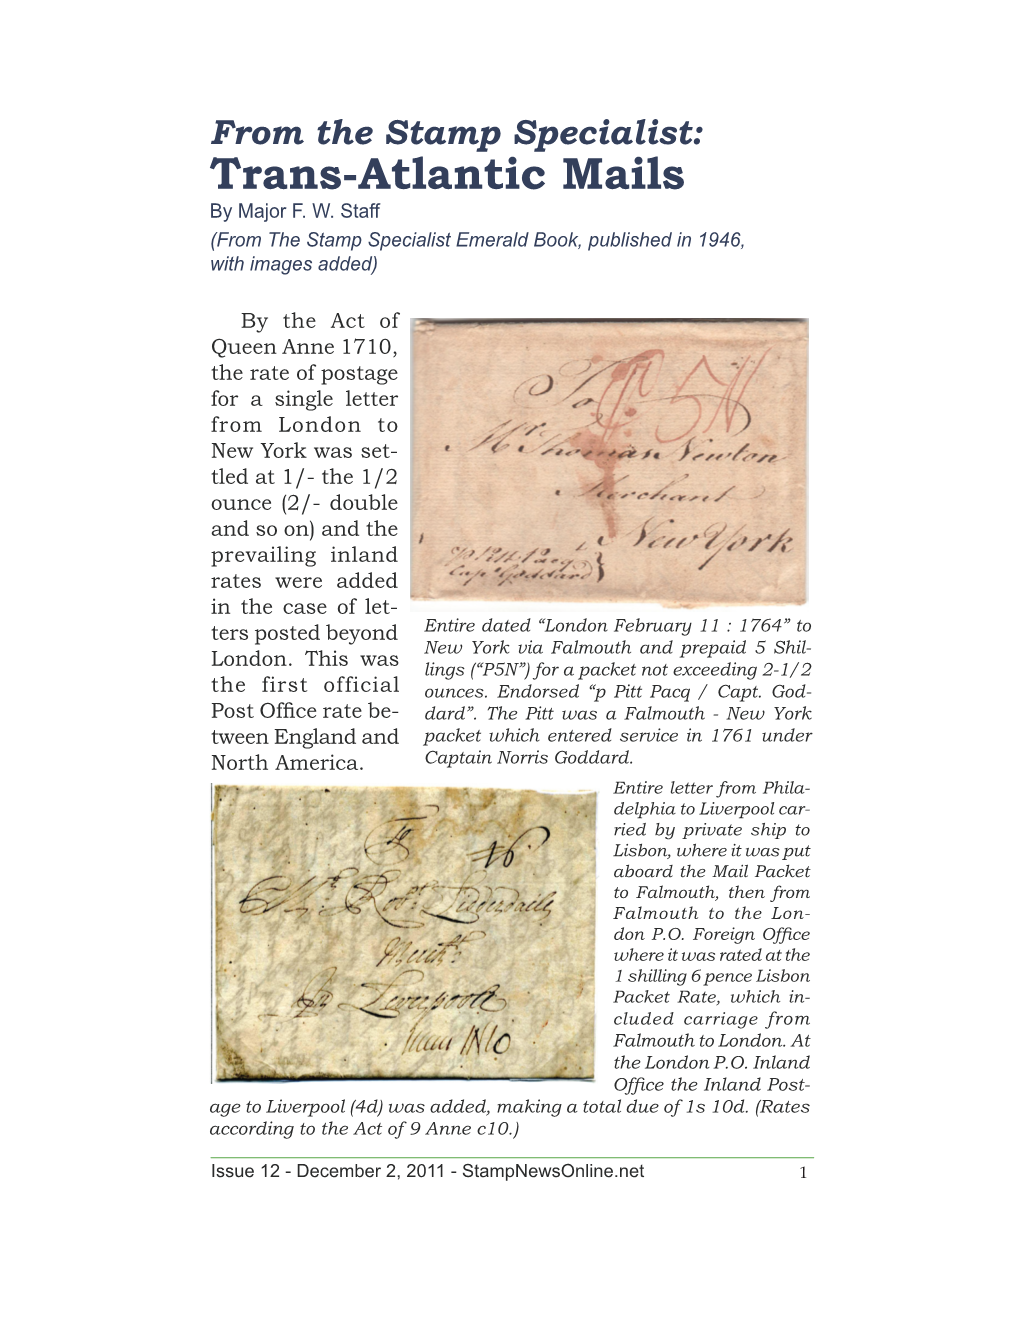 Trans-Atlantic Mails by Major F